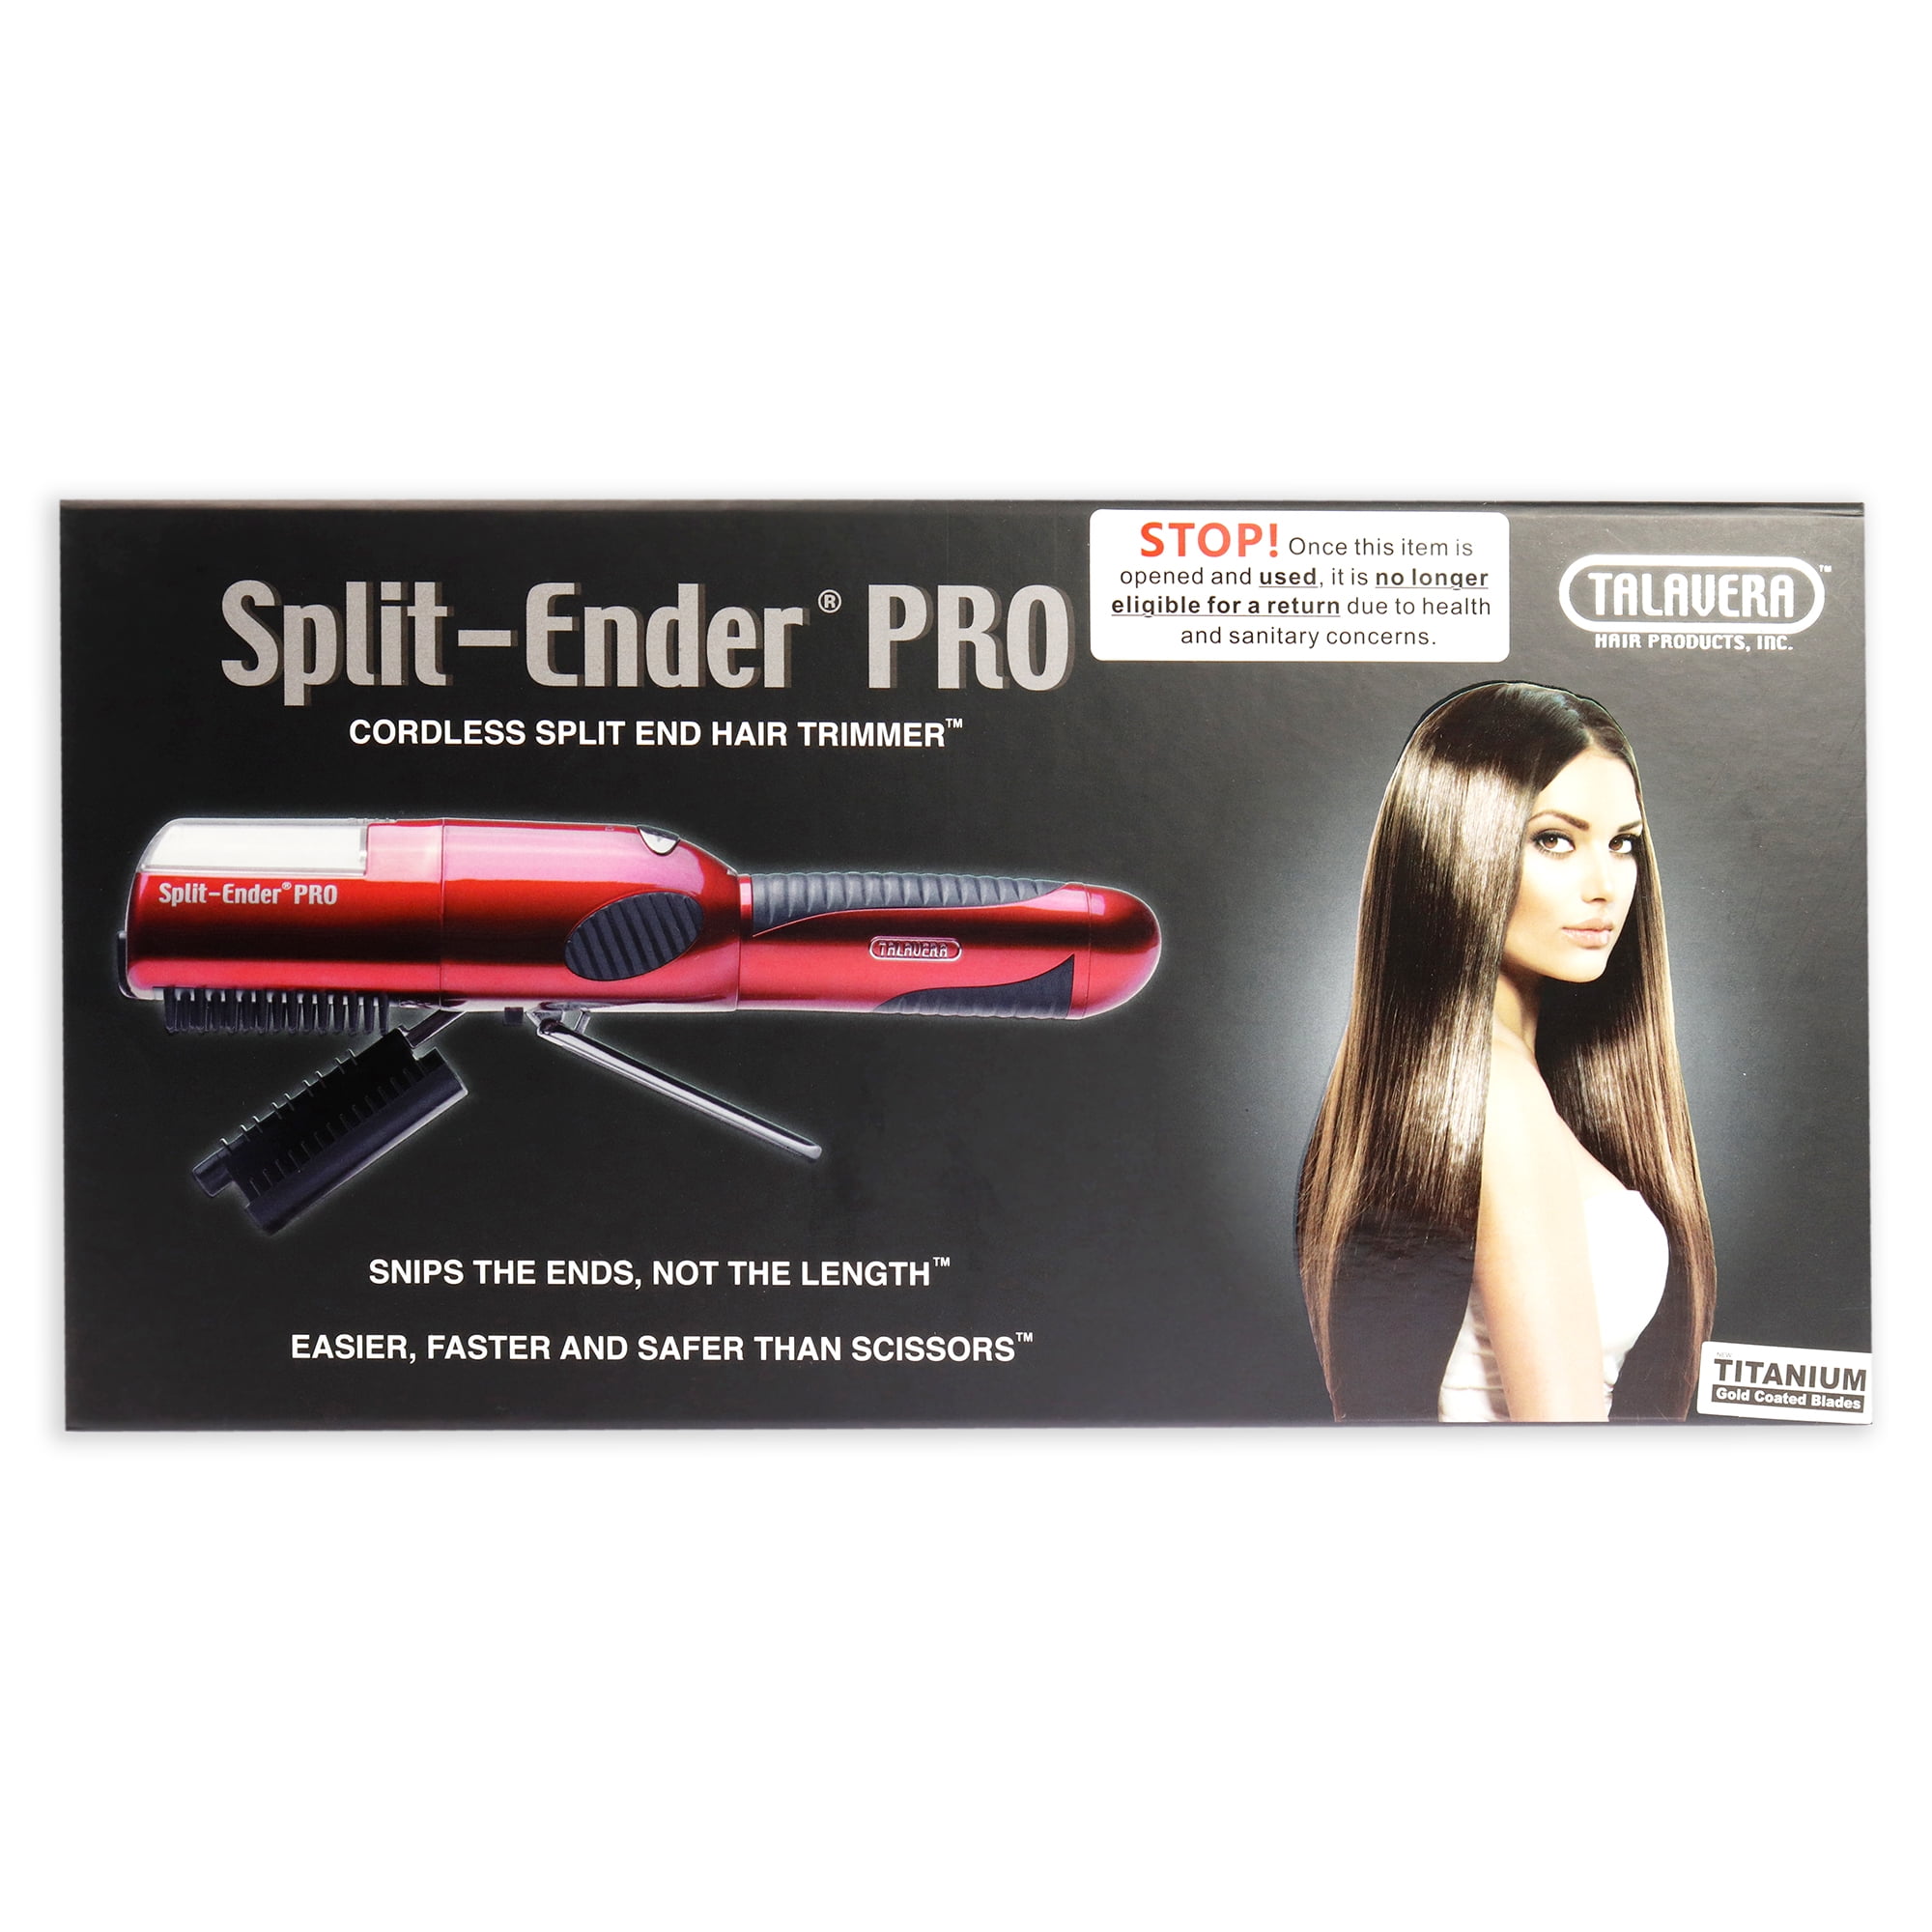 Split-Ender PRO2 Metallic Red w. USA Charger - BUY NOW $149.99